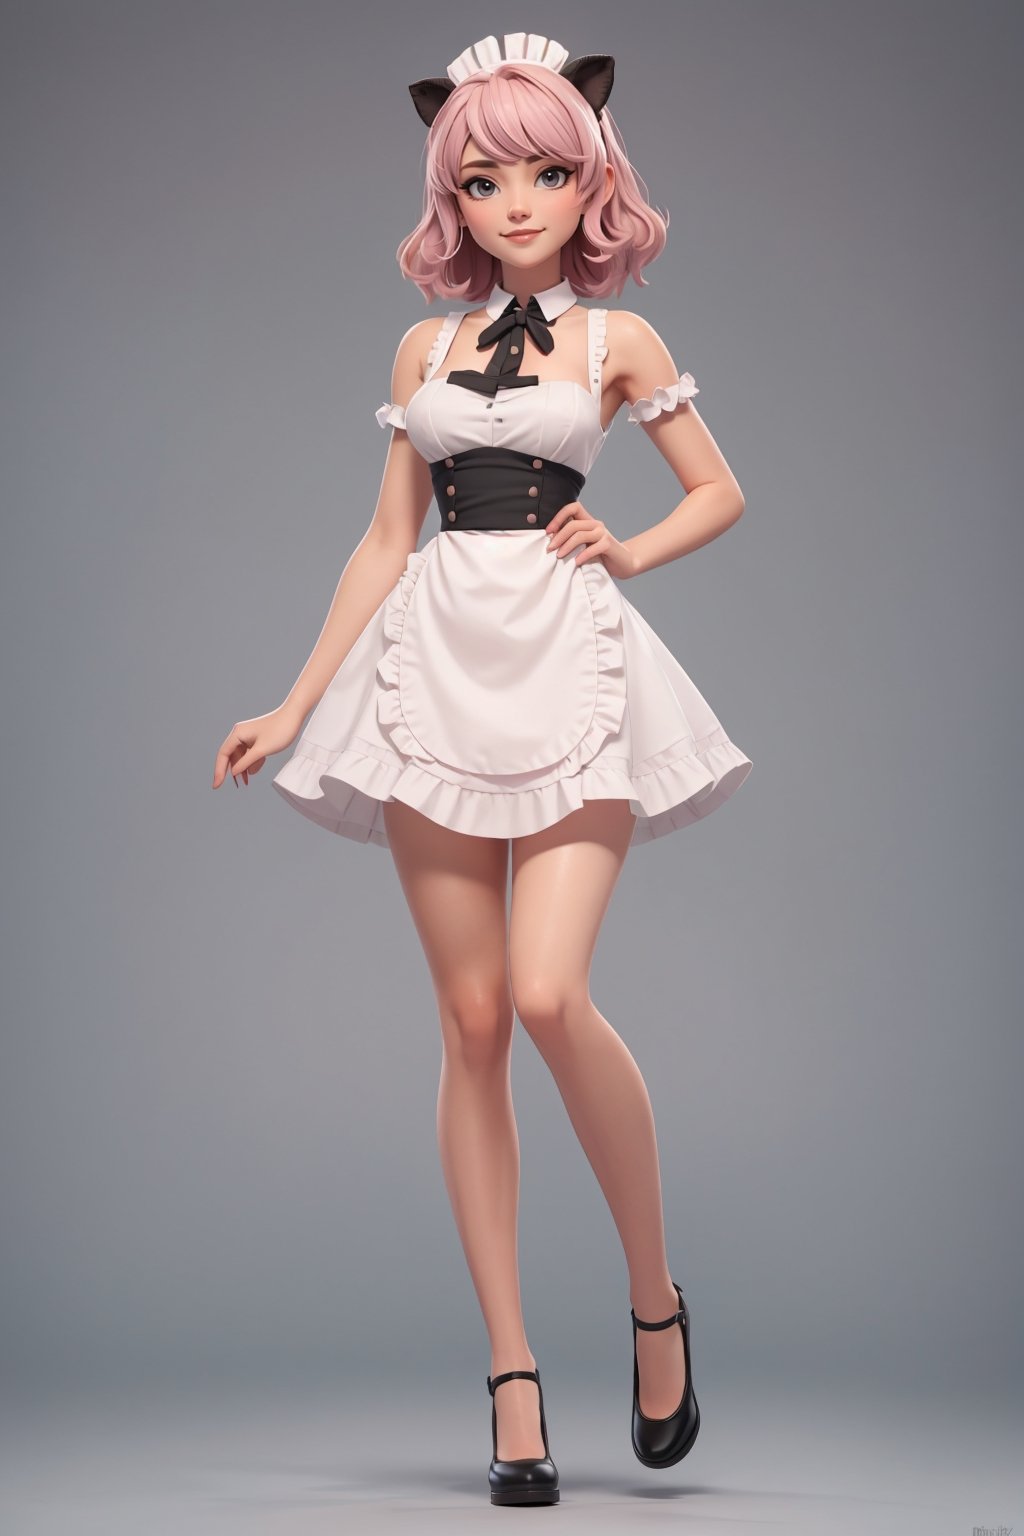 character sheet, beautiful, good hands, full body, good body, 18 year old girl body, sexy pose, full_body,character_sheet, shoulder length fluffy semi wavy hair, pink hair, maid clothes, white stockings, looking to the camera,playful bulldog puppy